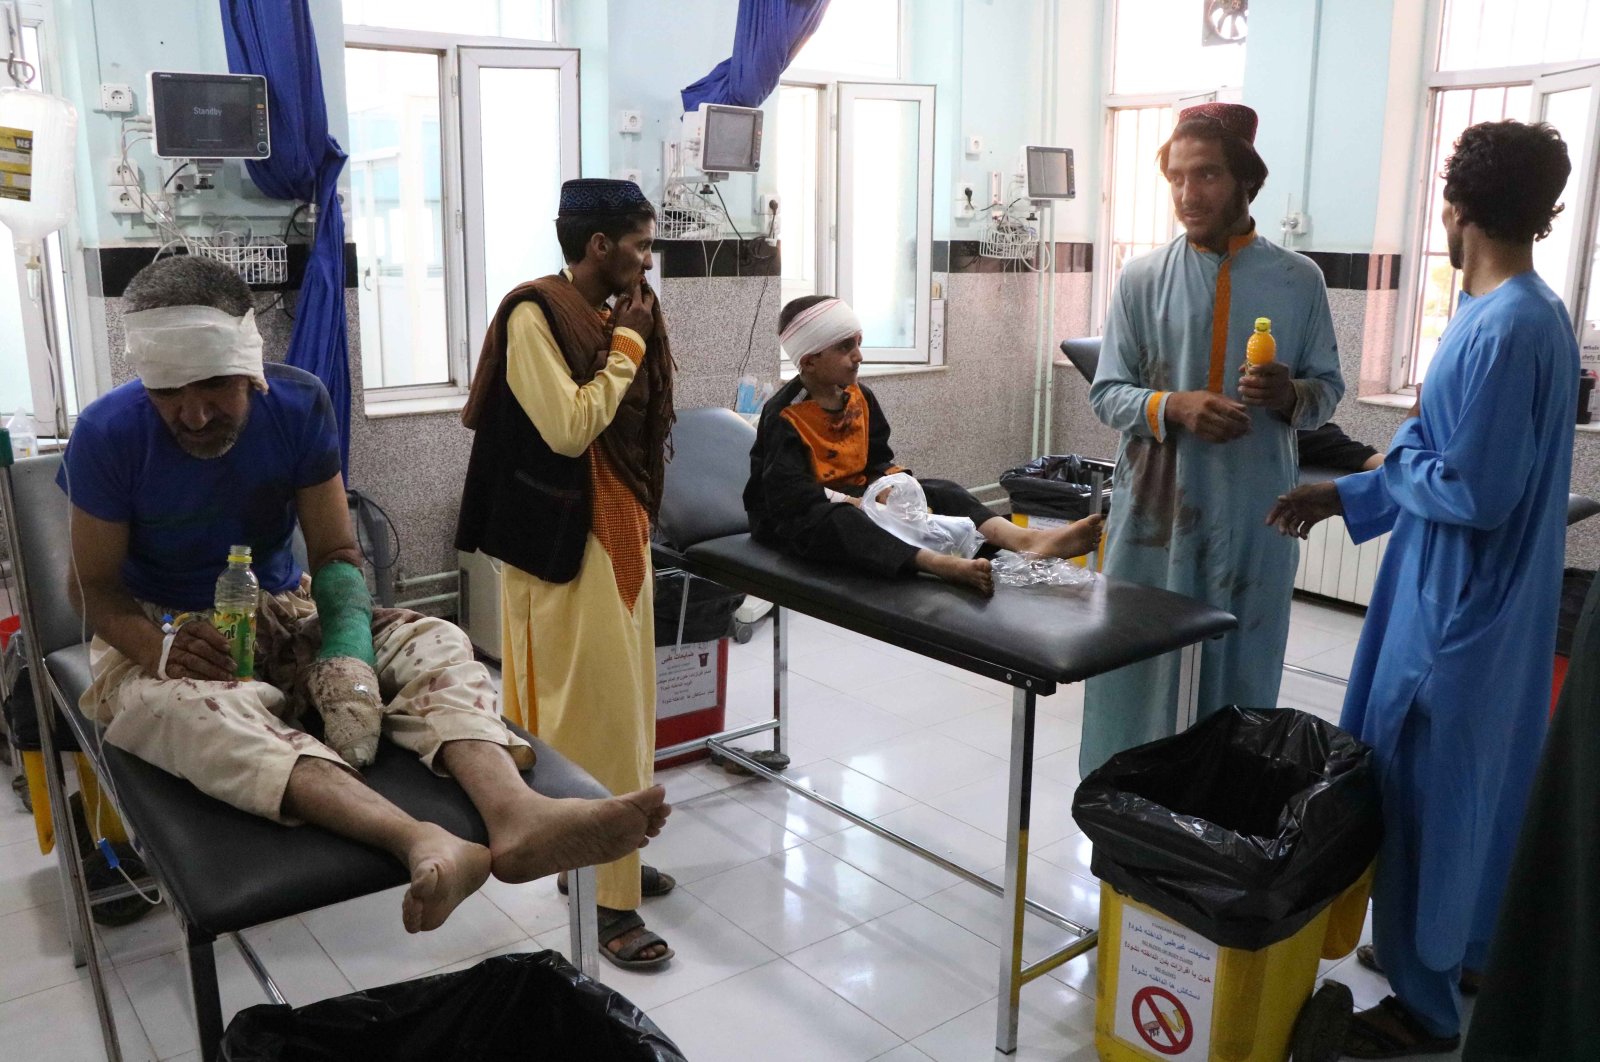 People who were injured in an alleged airstrike by Afghan security forces on suspected Taliban hideouts in Gozara district, receive medical treatment after they were brought to a hospital in Herat, Afghanistan, July 22, 2020. (EPA Photo)